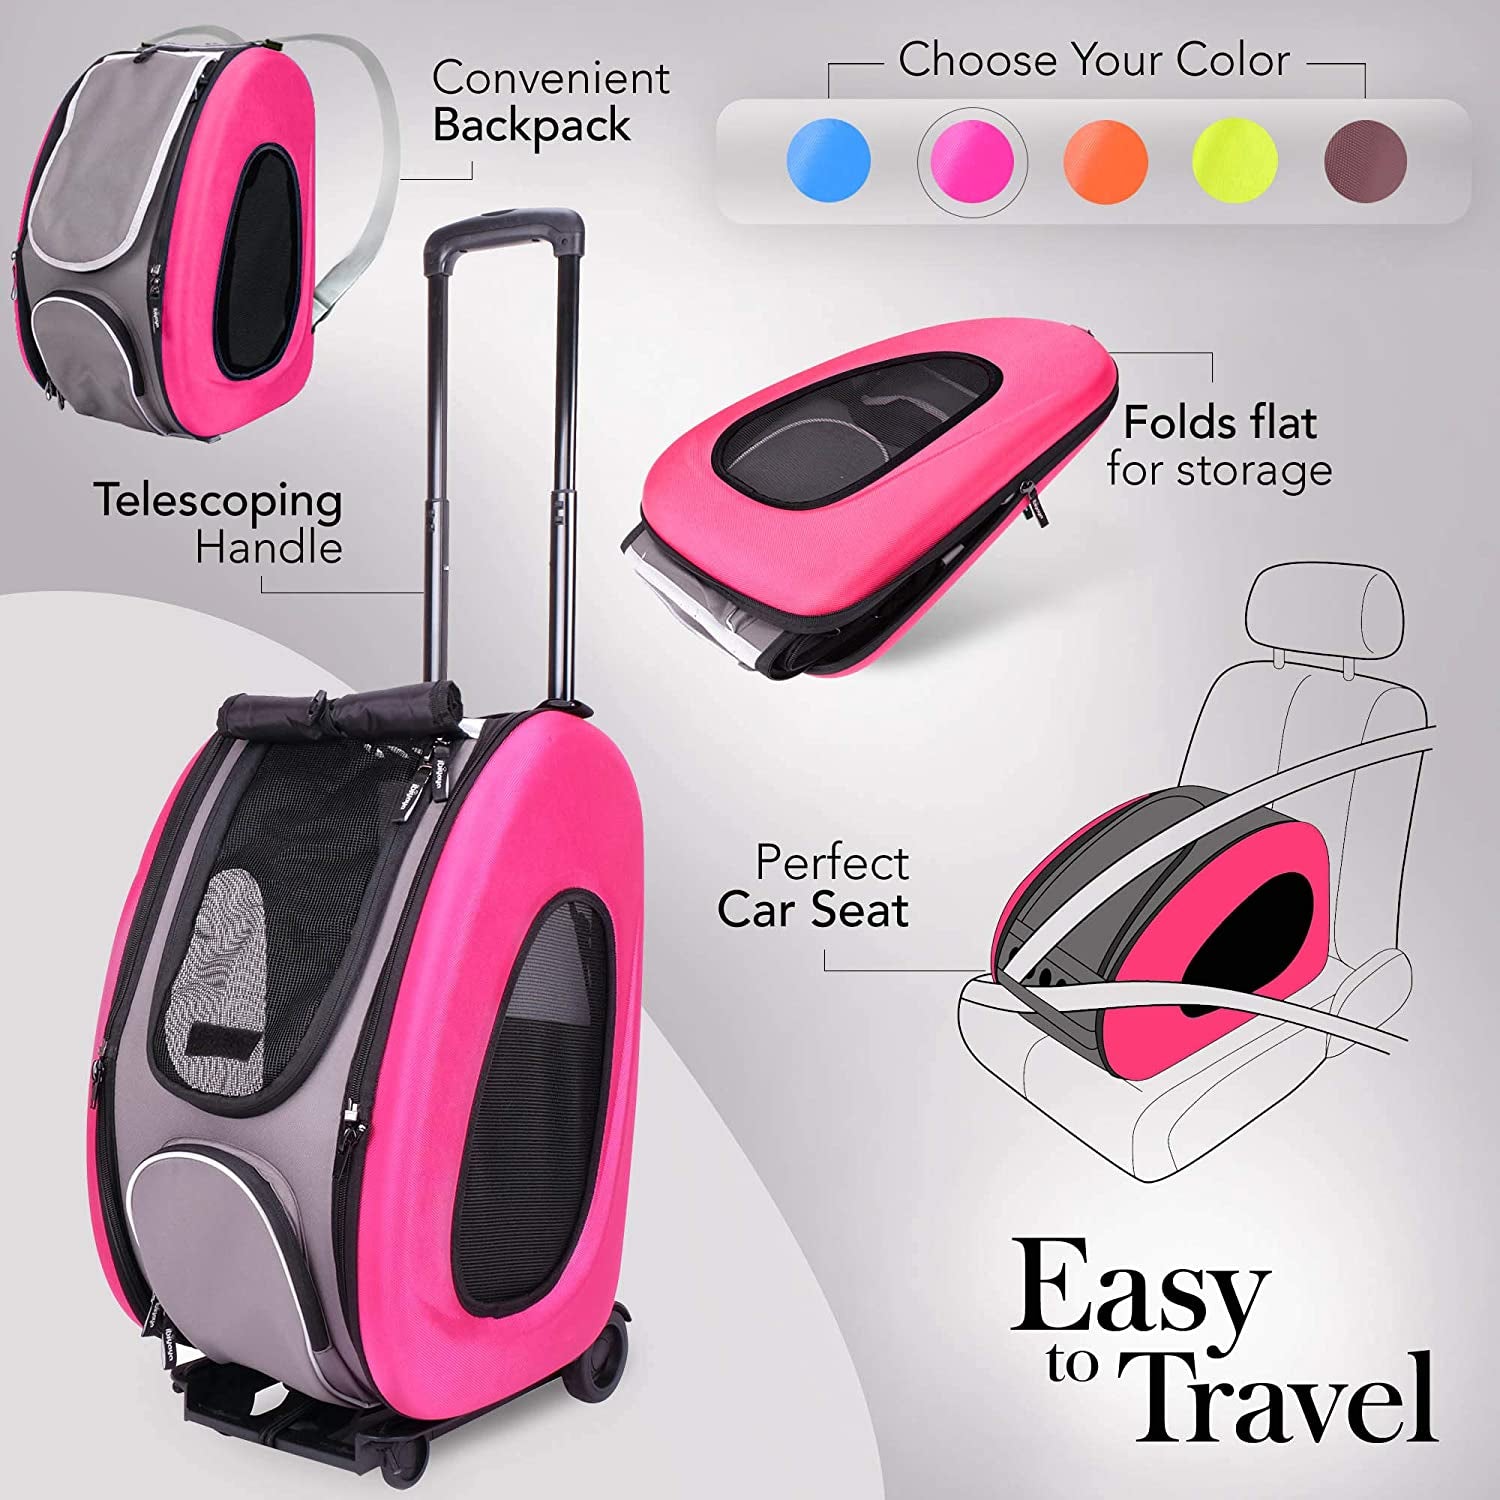 5-In-1 Pet Carrier with Backpack, Pet Carrier Stroller, Shoulder Strap, Carriers with Wheels for Dogs and Cats - Pink